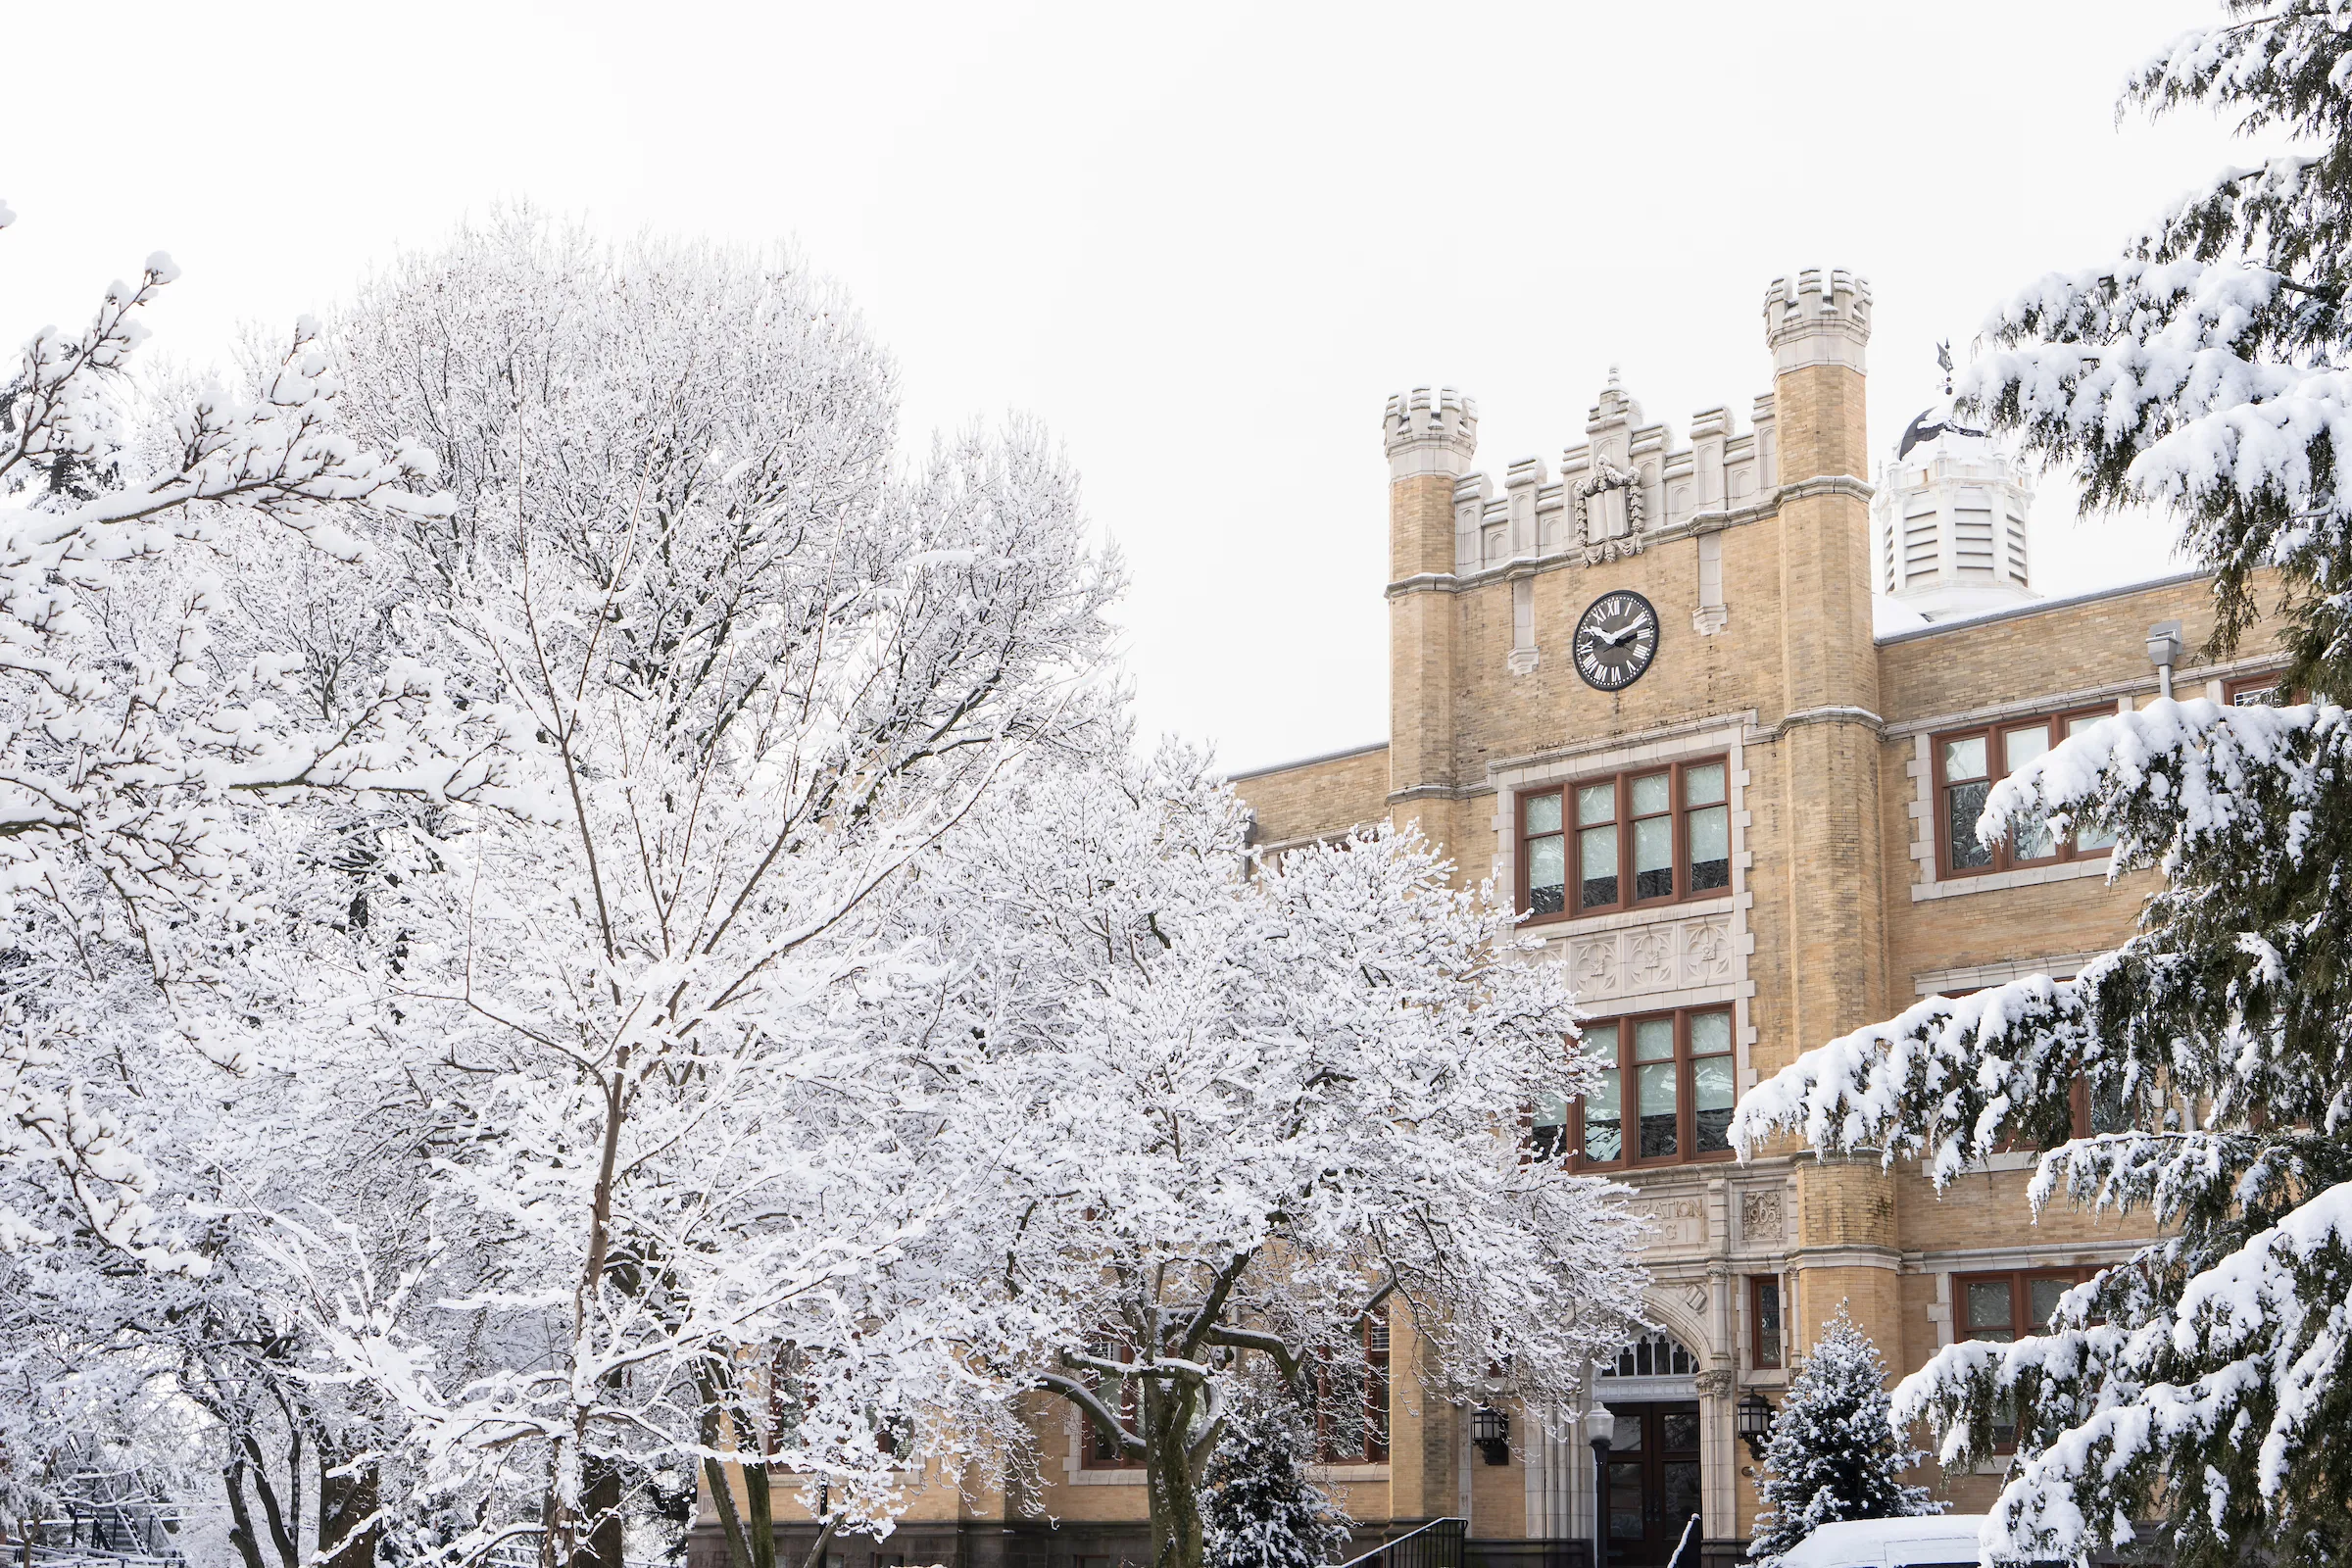 LVC Humanities Building with snow on trees in winter